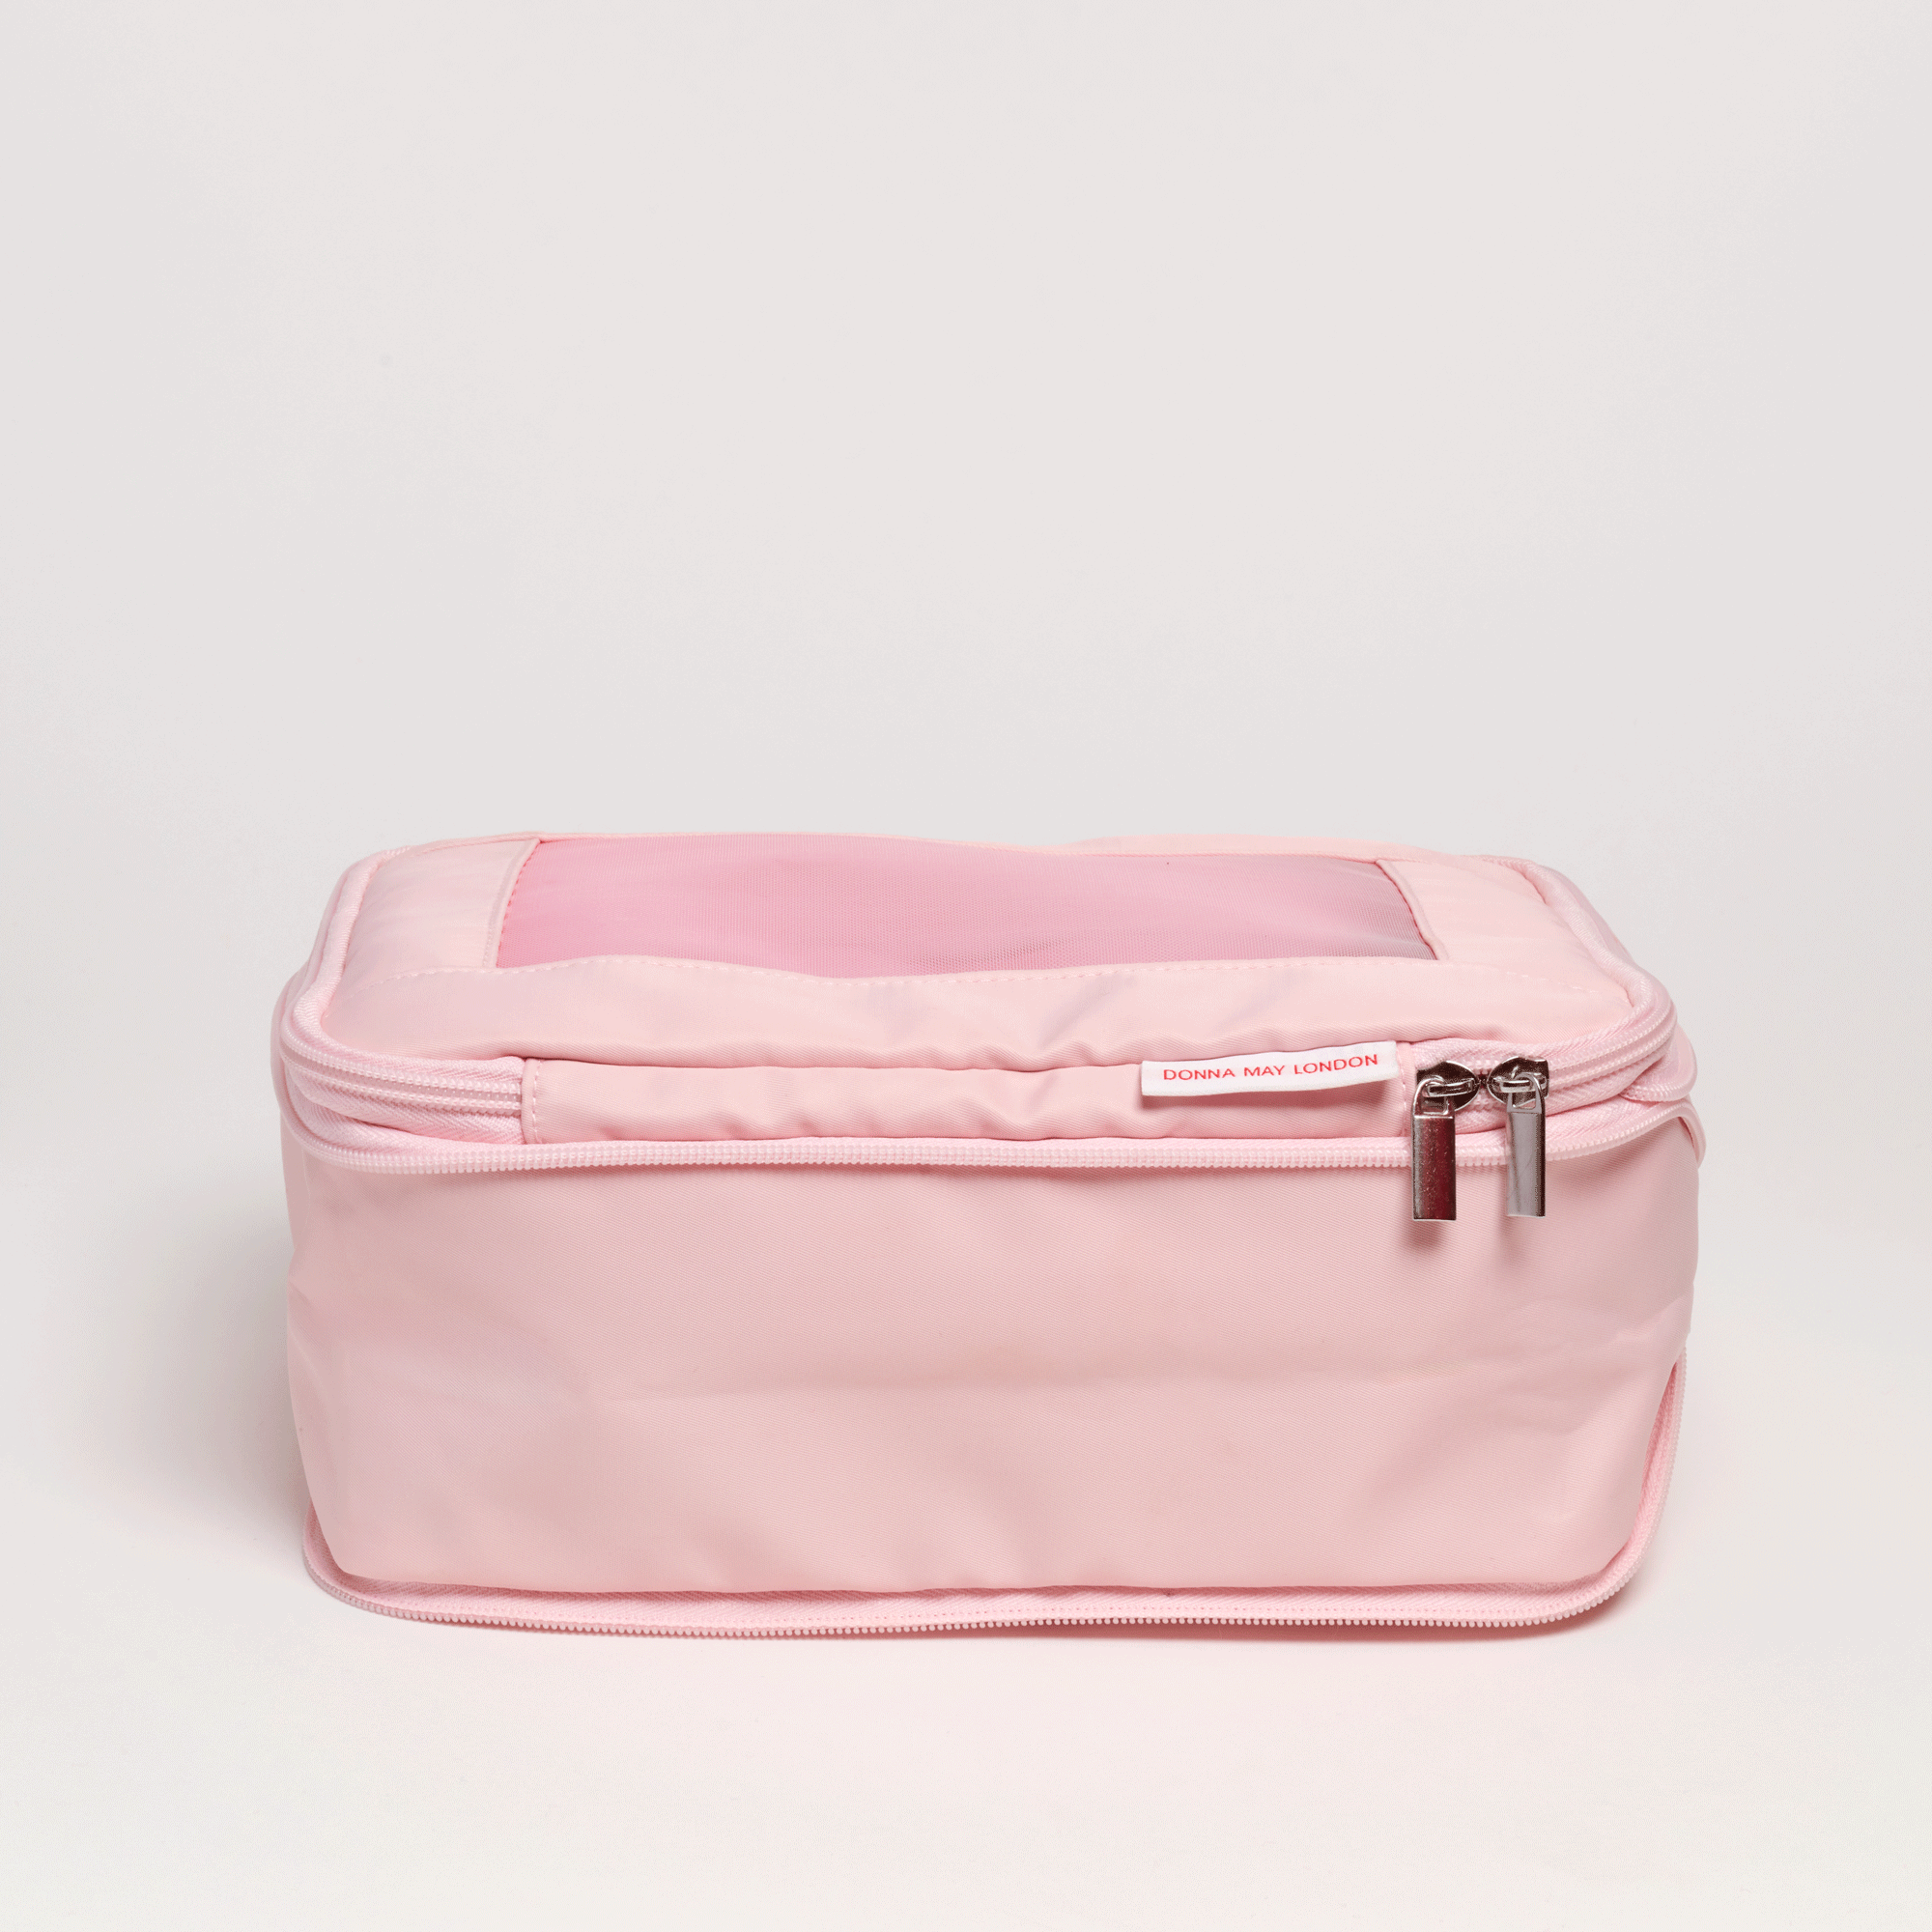 Compression Packing Cubes Set of 4 - pink with stripe interior.